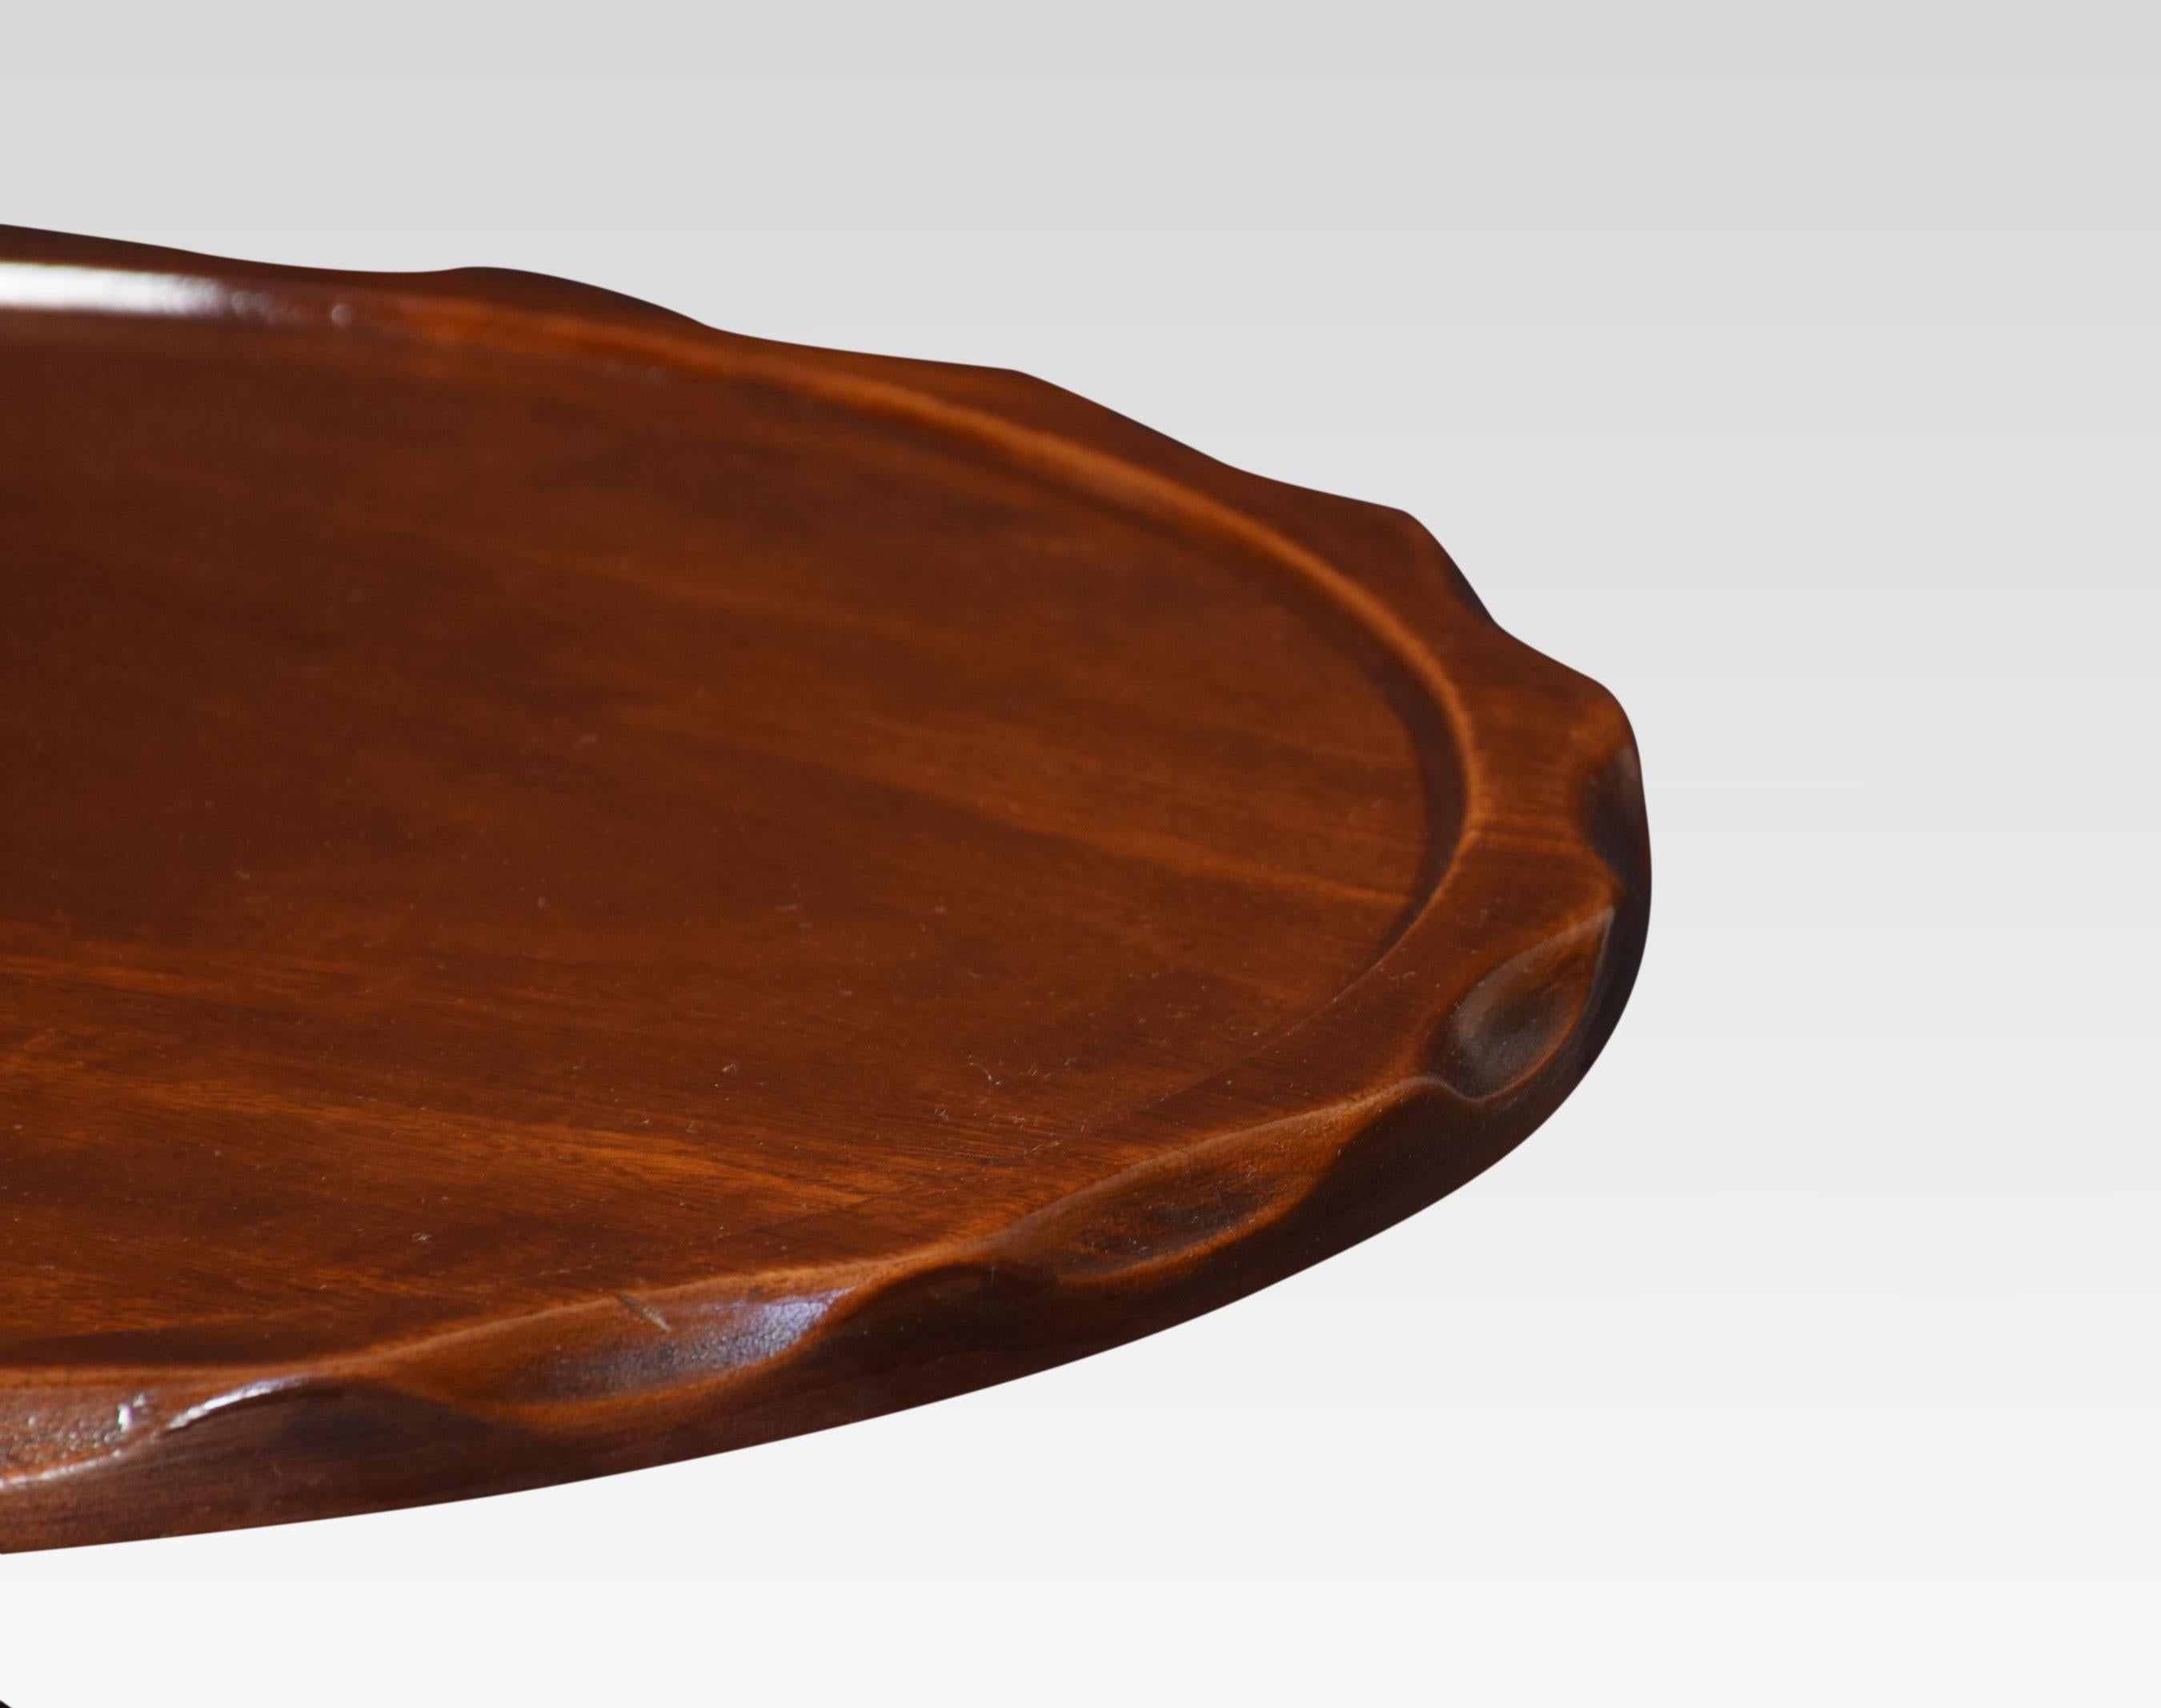 Mahogany Lazy Susan, the circular top with carved molded edge raised up on circular stepped base.
Dimensions
Height 7 inches
Width 17.5 inches
Depth 17.5 inches.